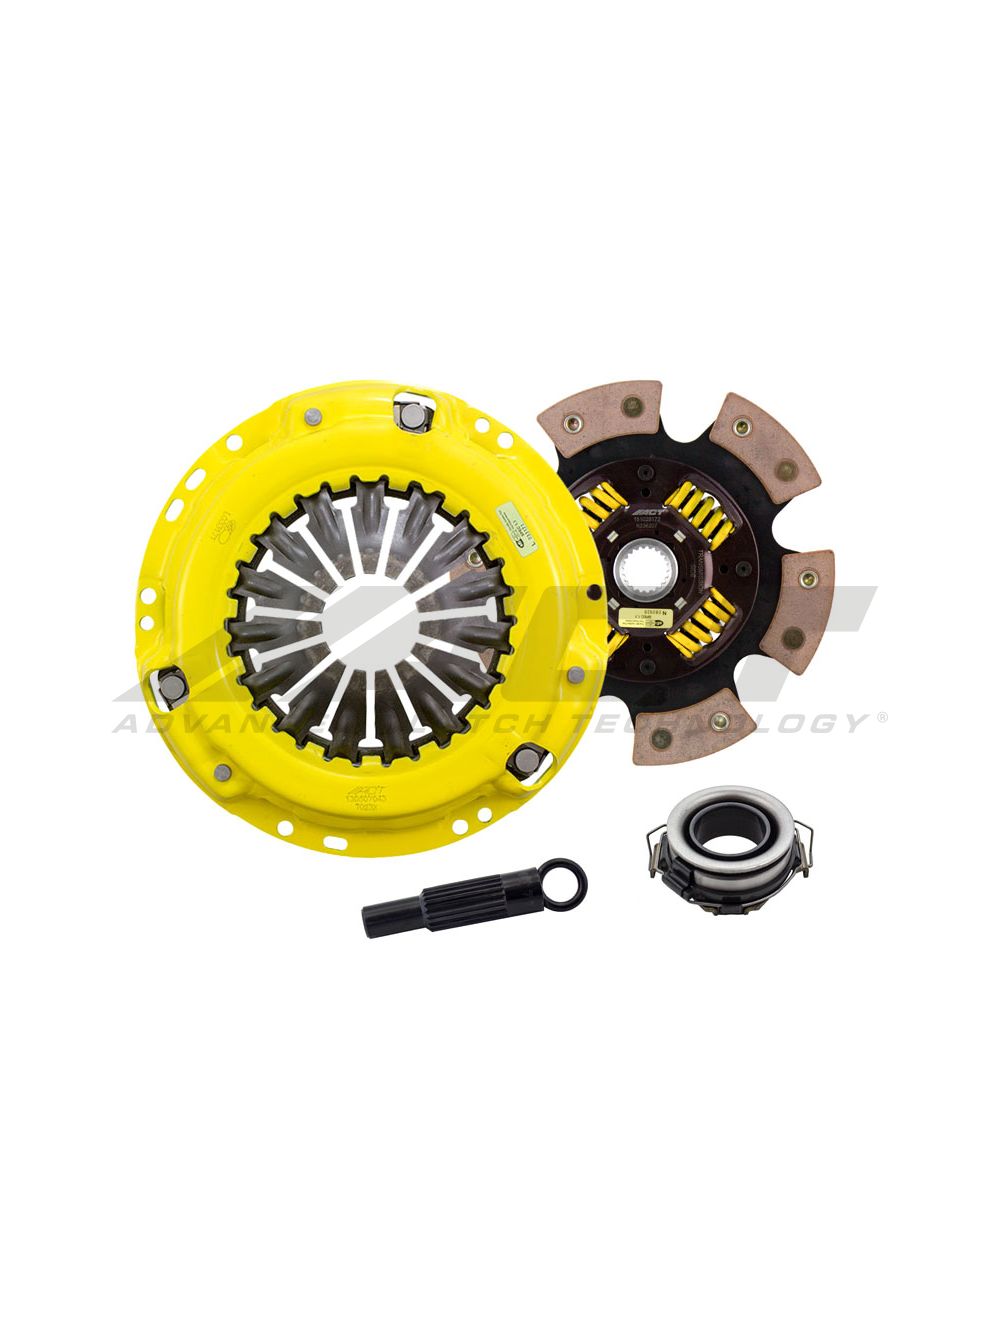 ACT Extreme Clutch Kit - 3SGTE; 6 Puck Sprung